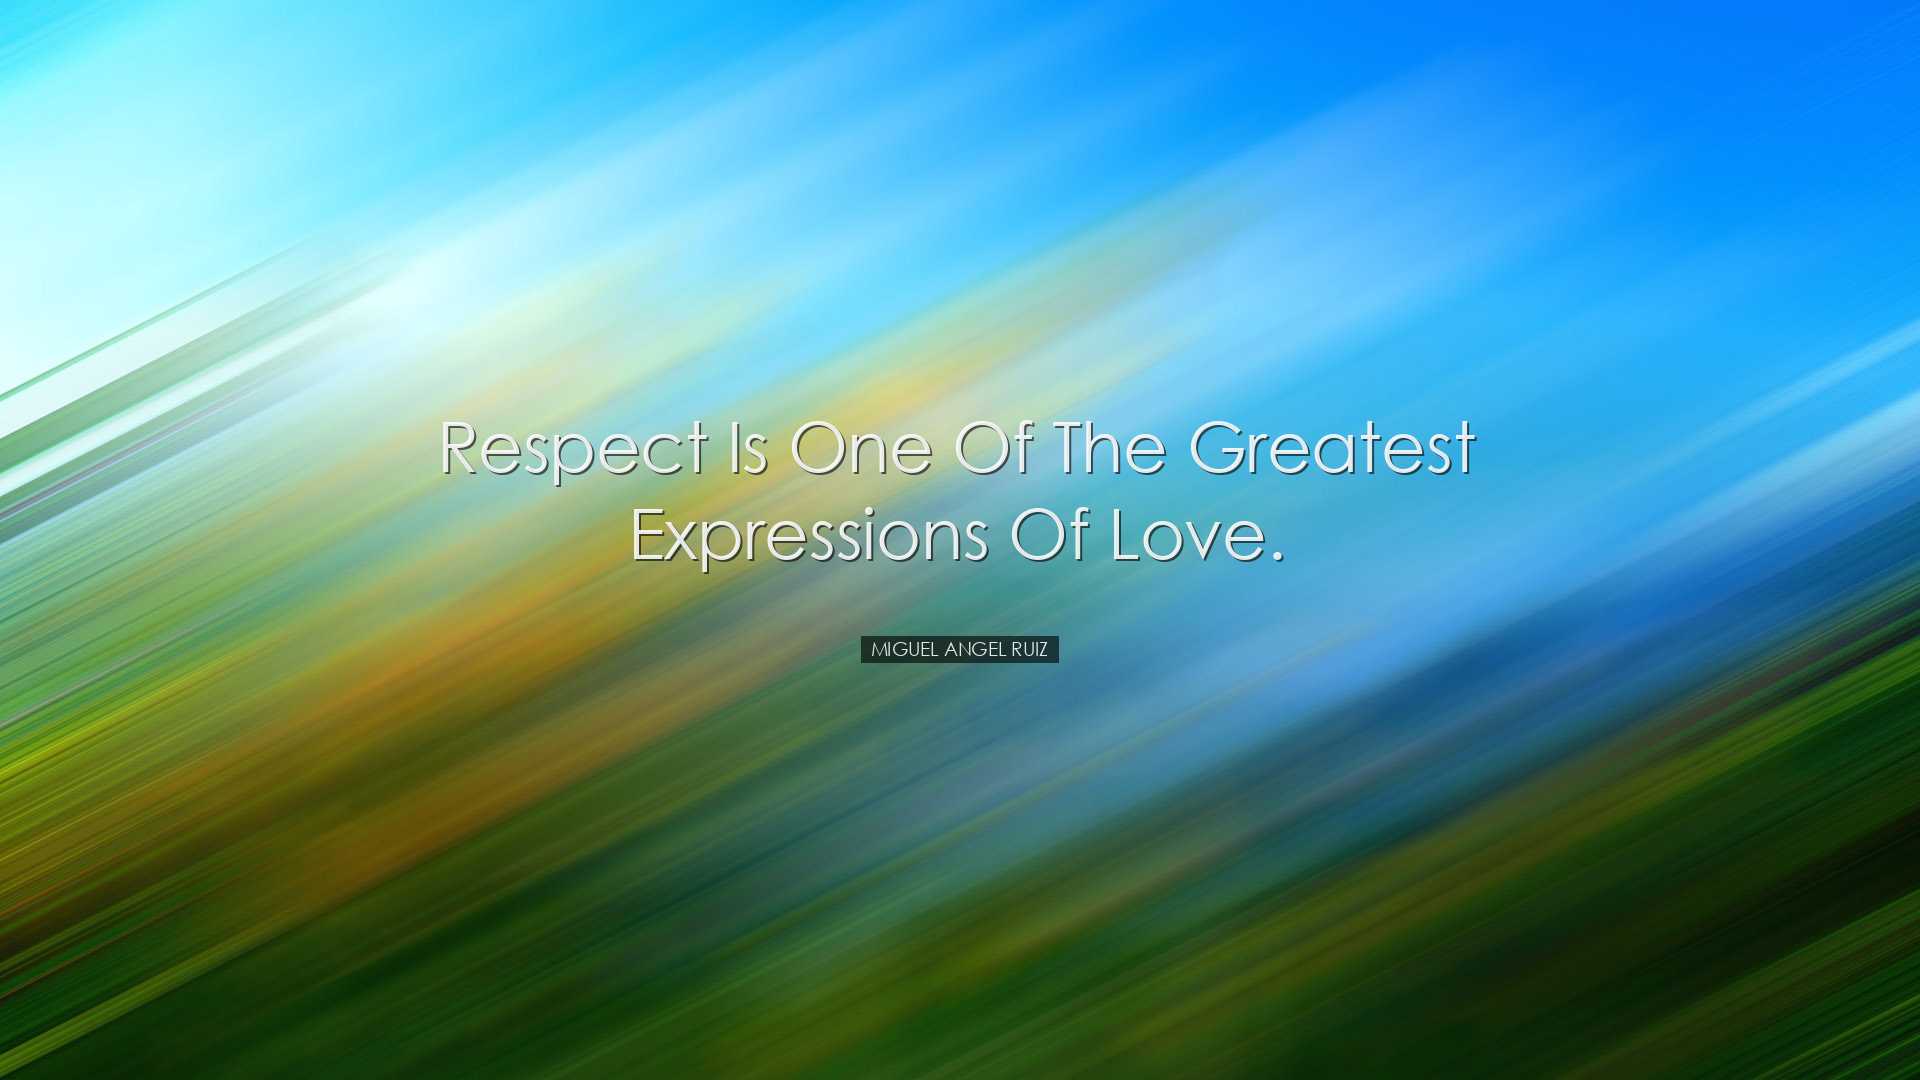 Respect is one of the greatest expressions of love. - Miguel Angel